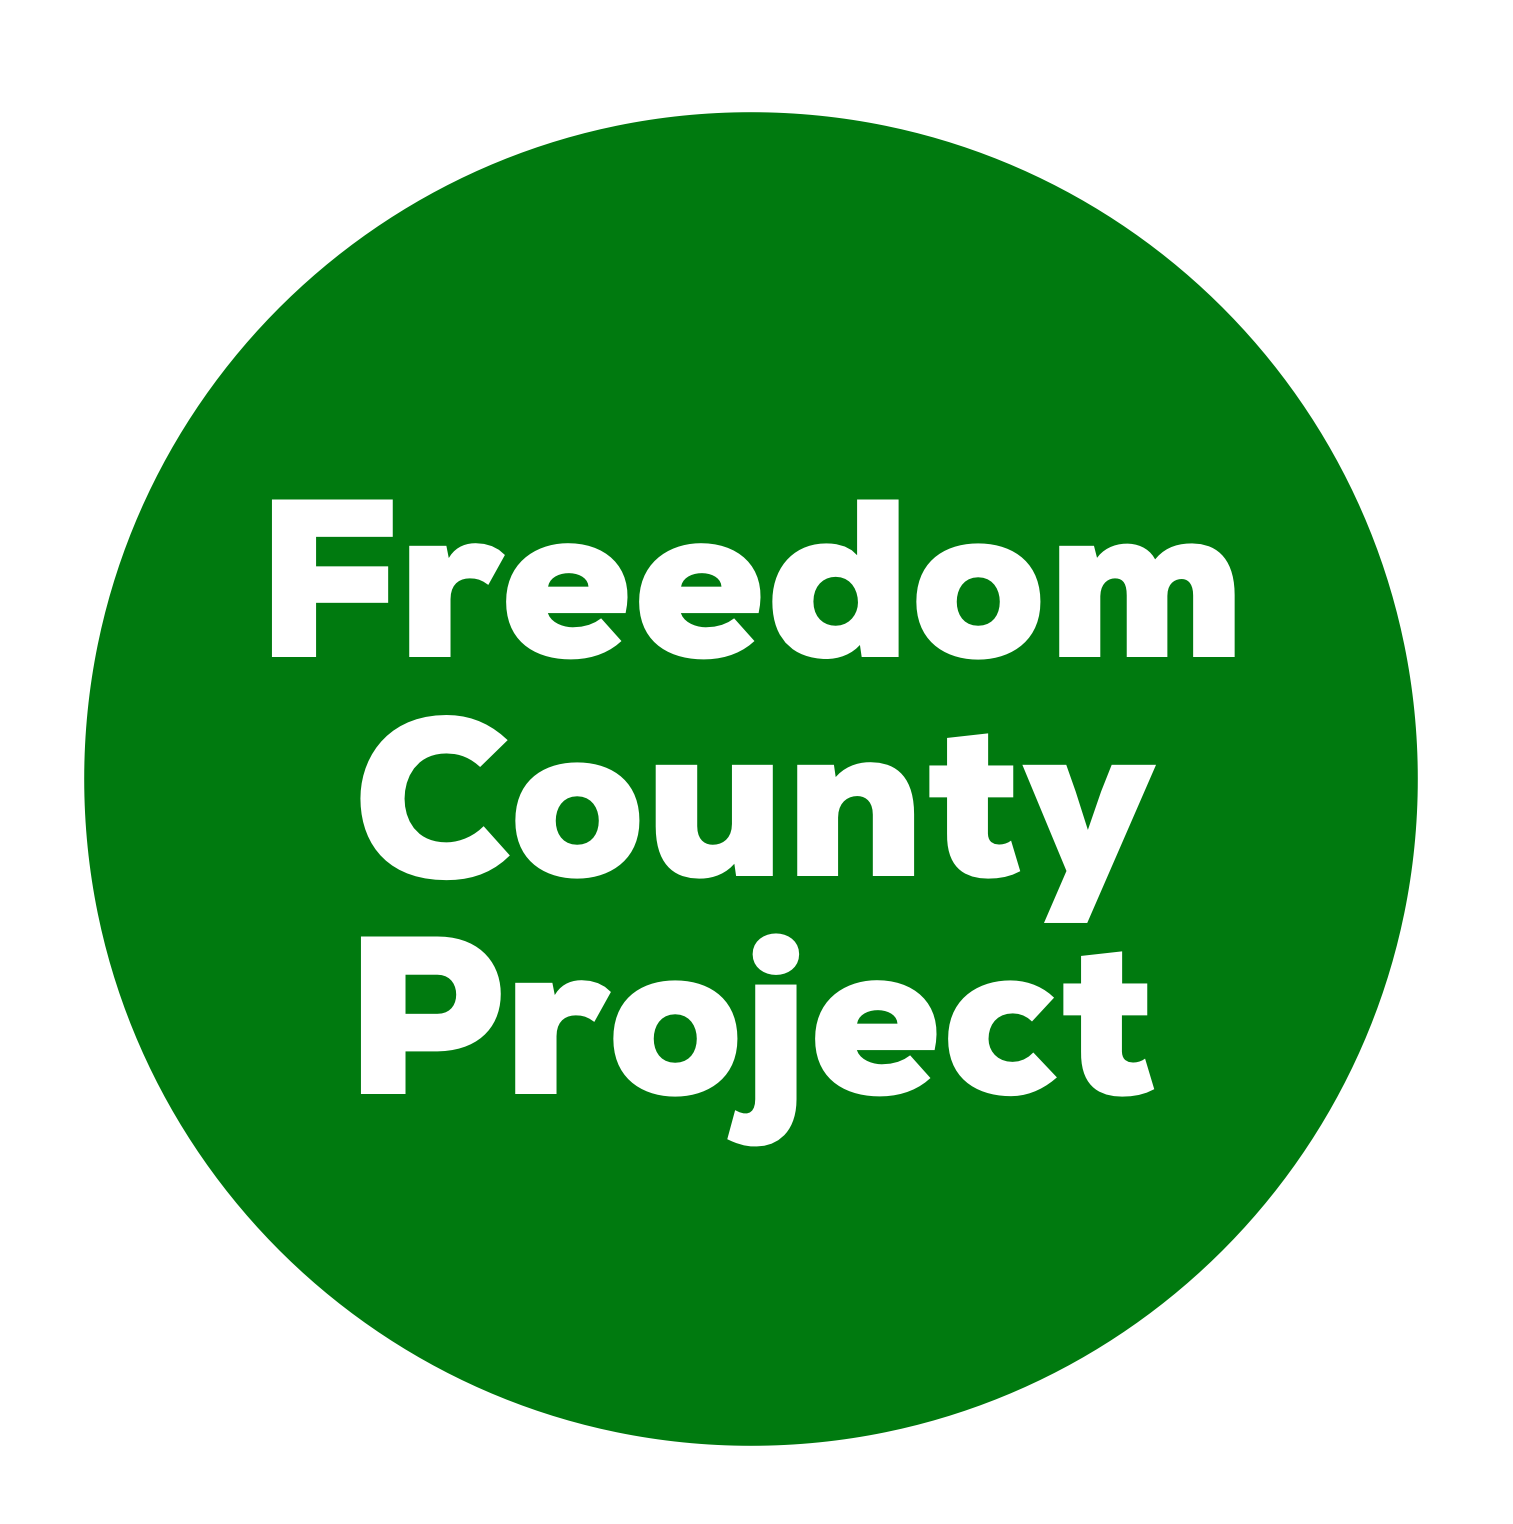 The Freedom County Project